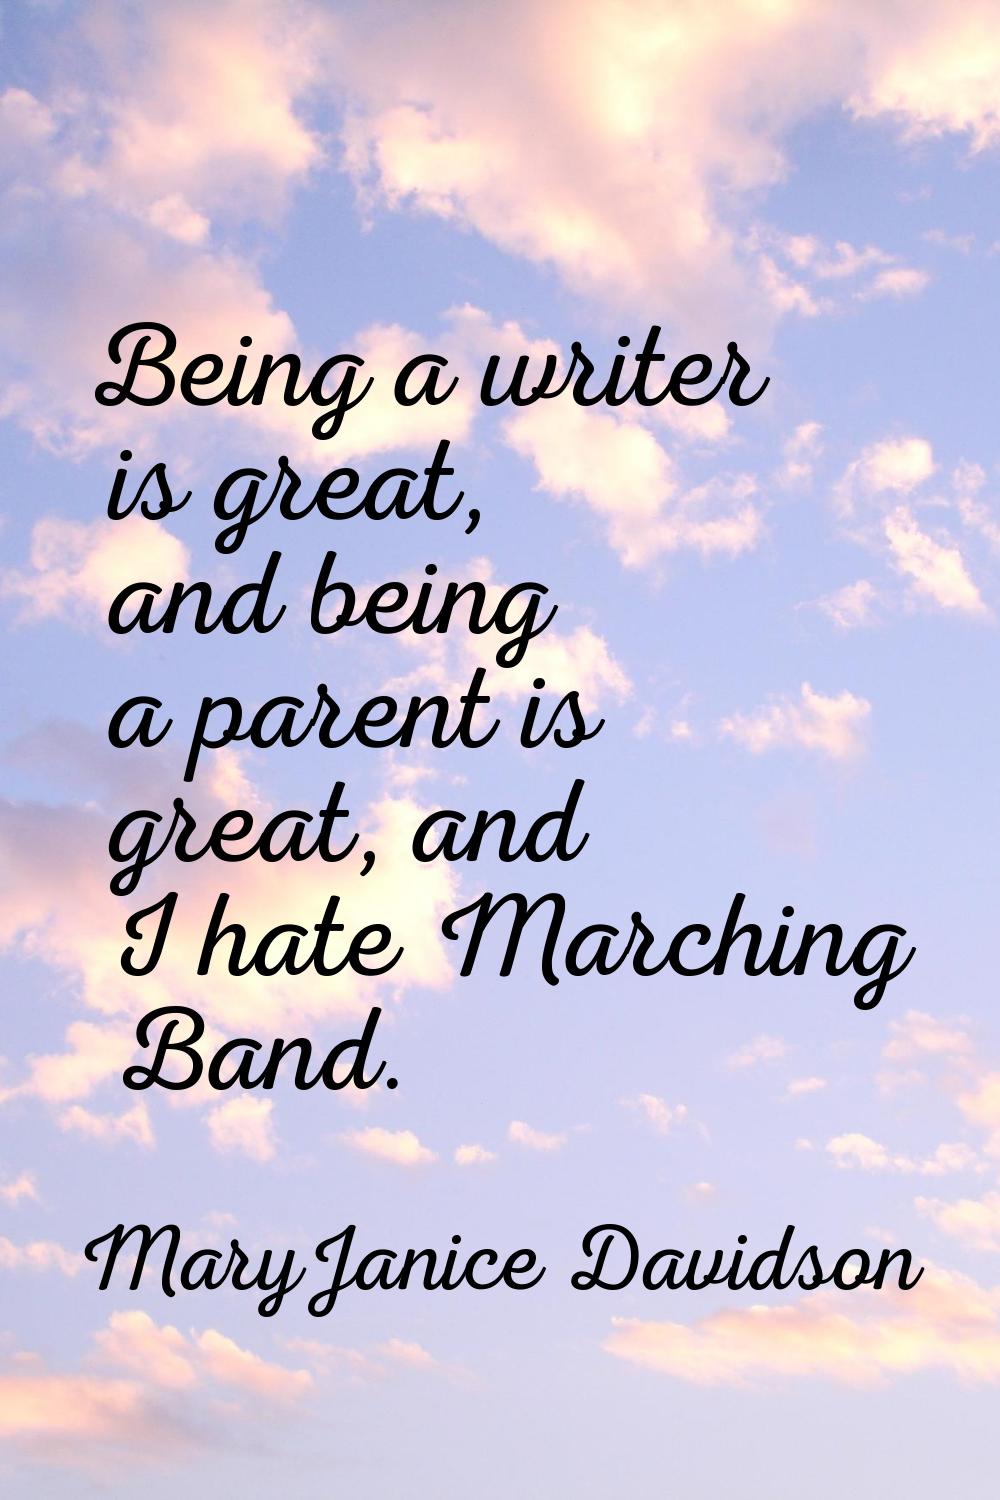 Being a writer is great, and being a parent is great, and I hate Marching Band.